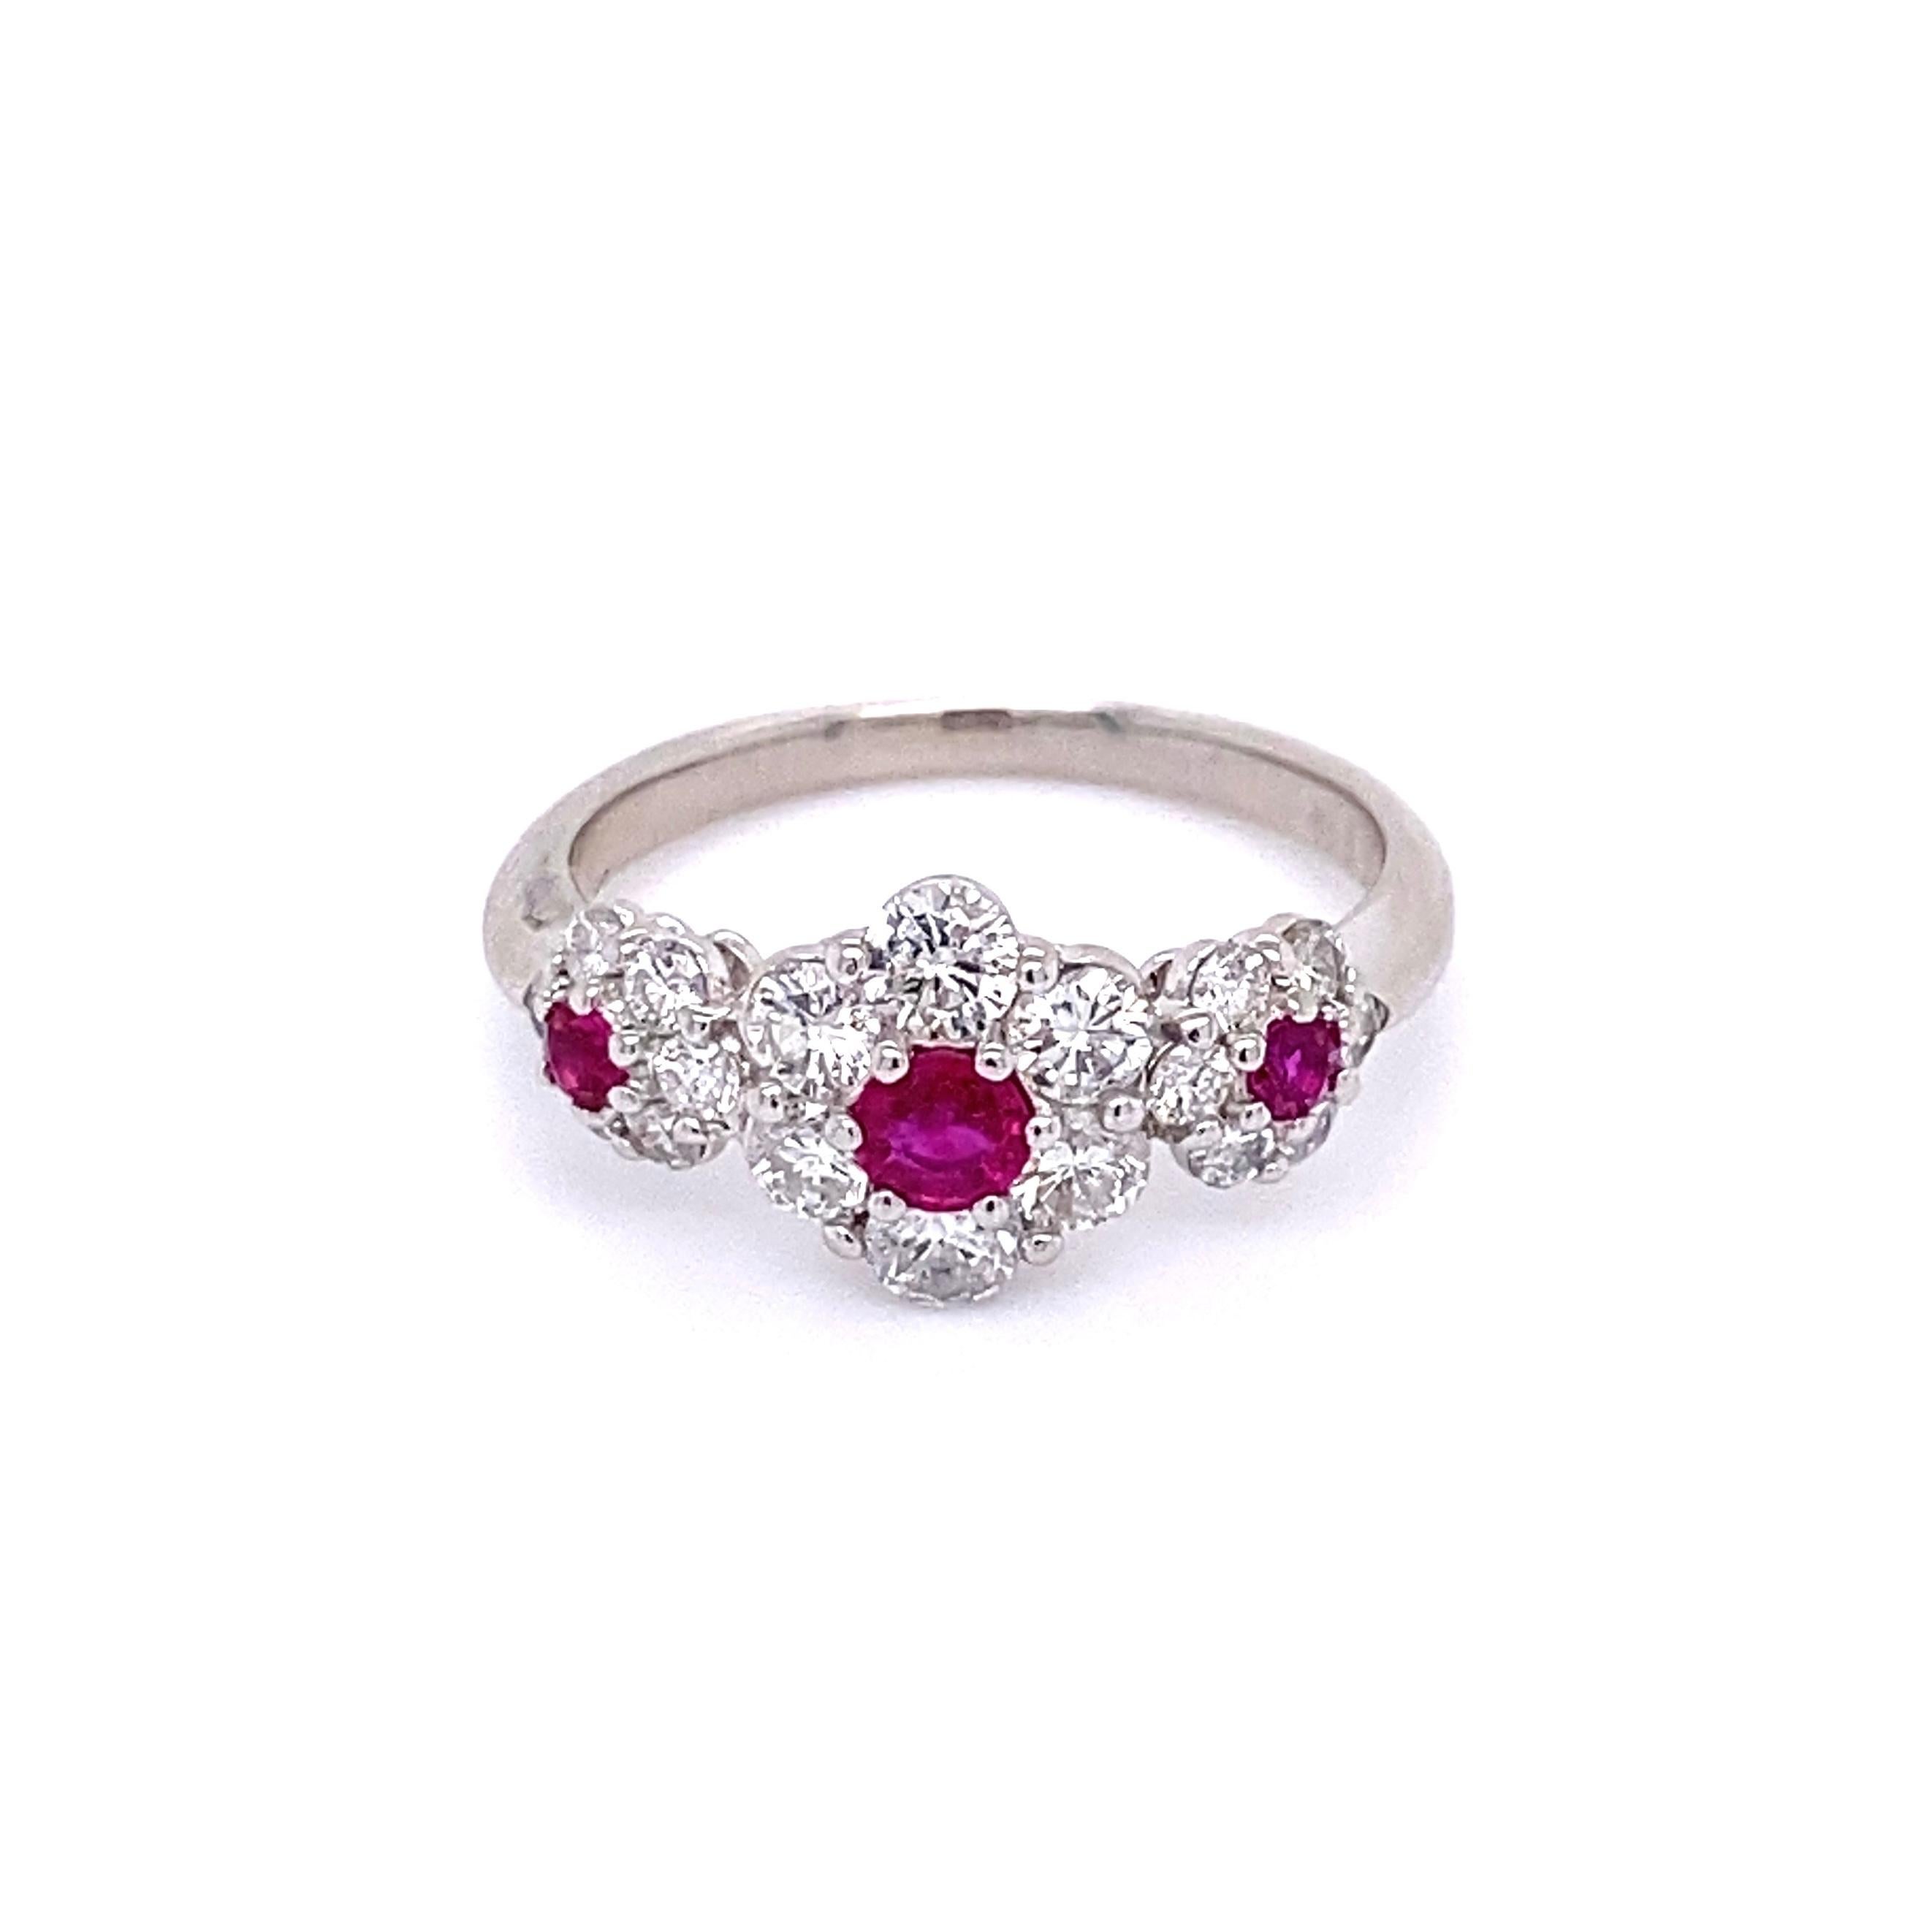 Ruby and Diamond 3 Stone Platinum Band Ring Estate Fine Jewelry In Excellent Condition For Sale In Montreal, QC